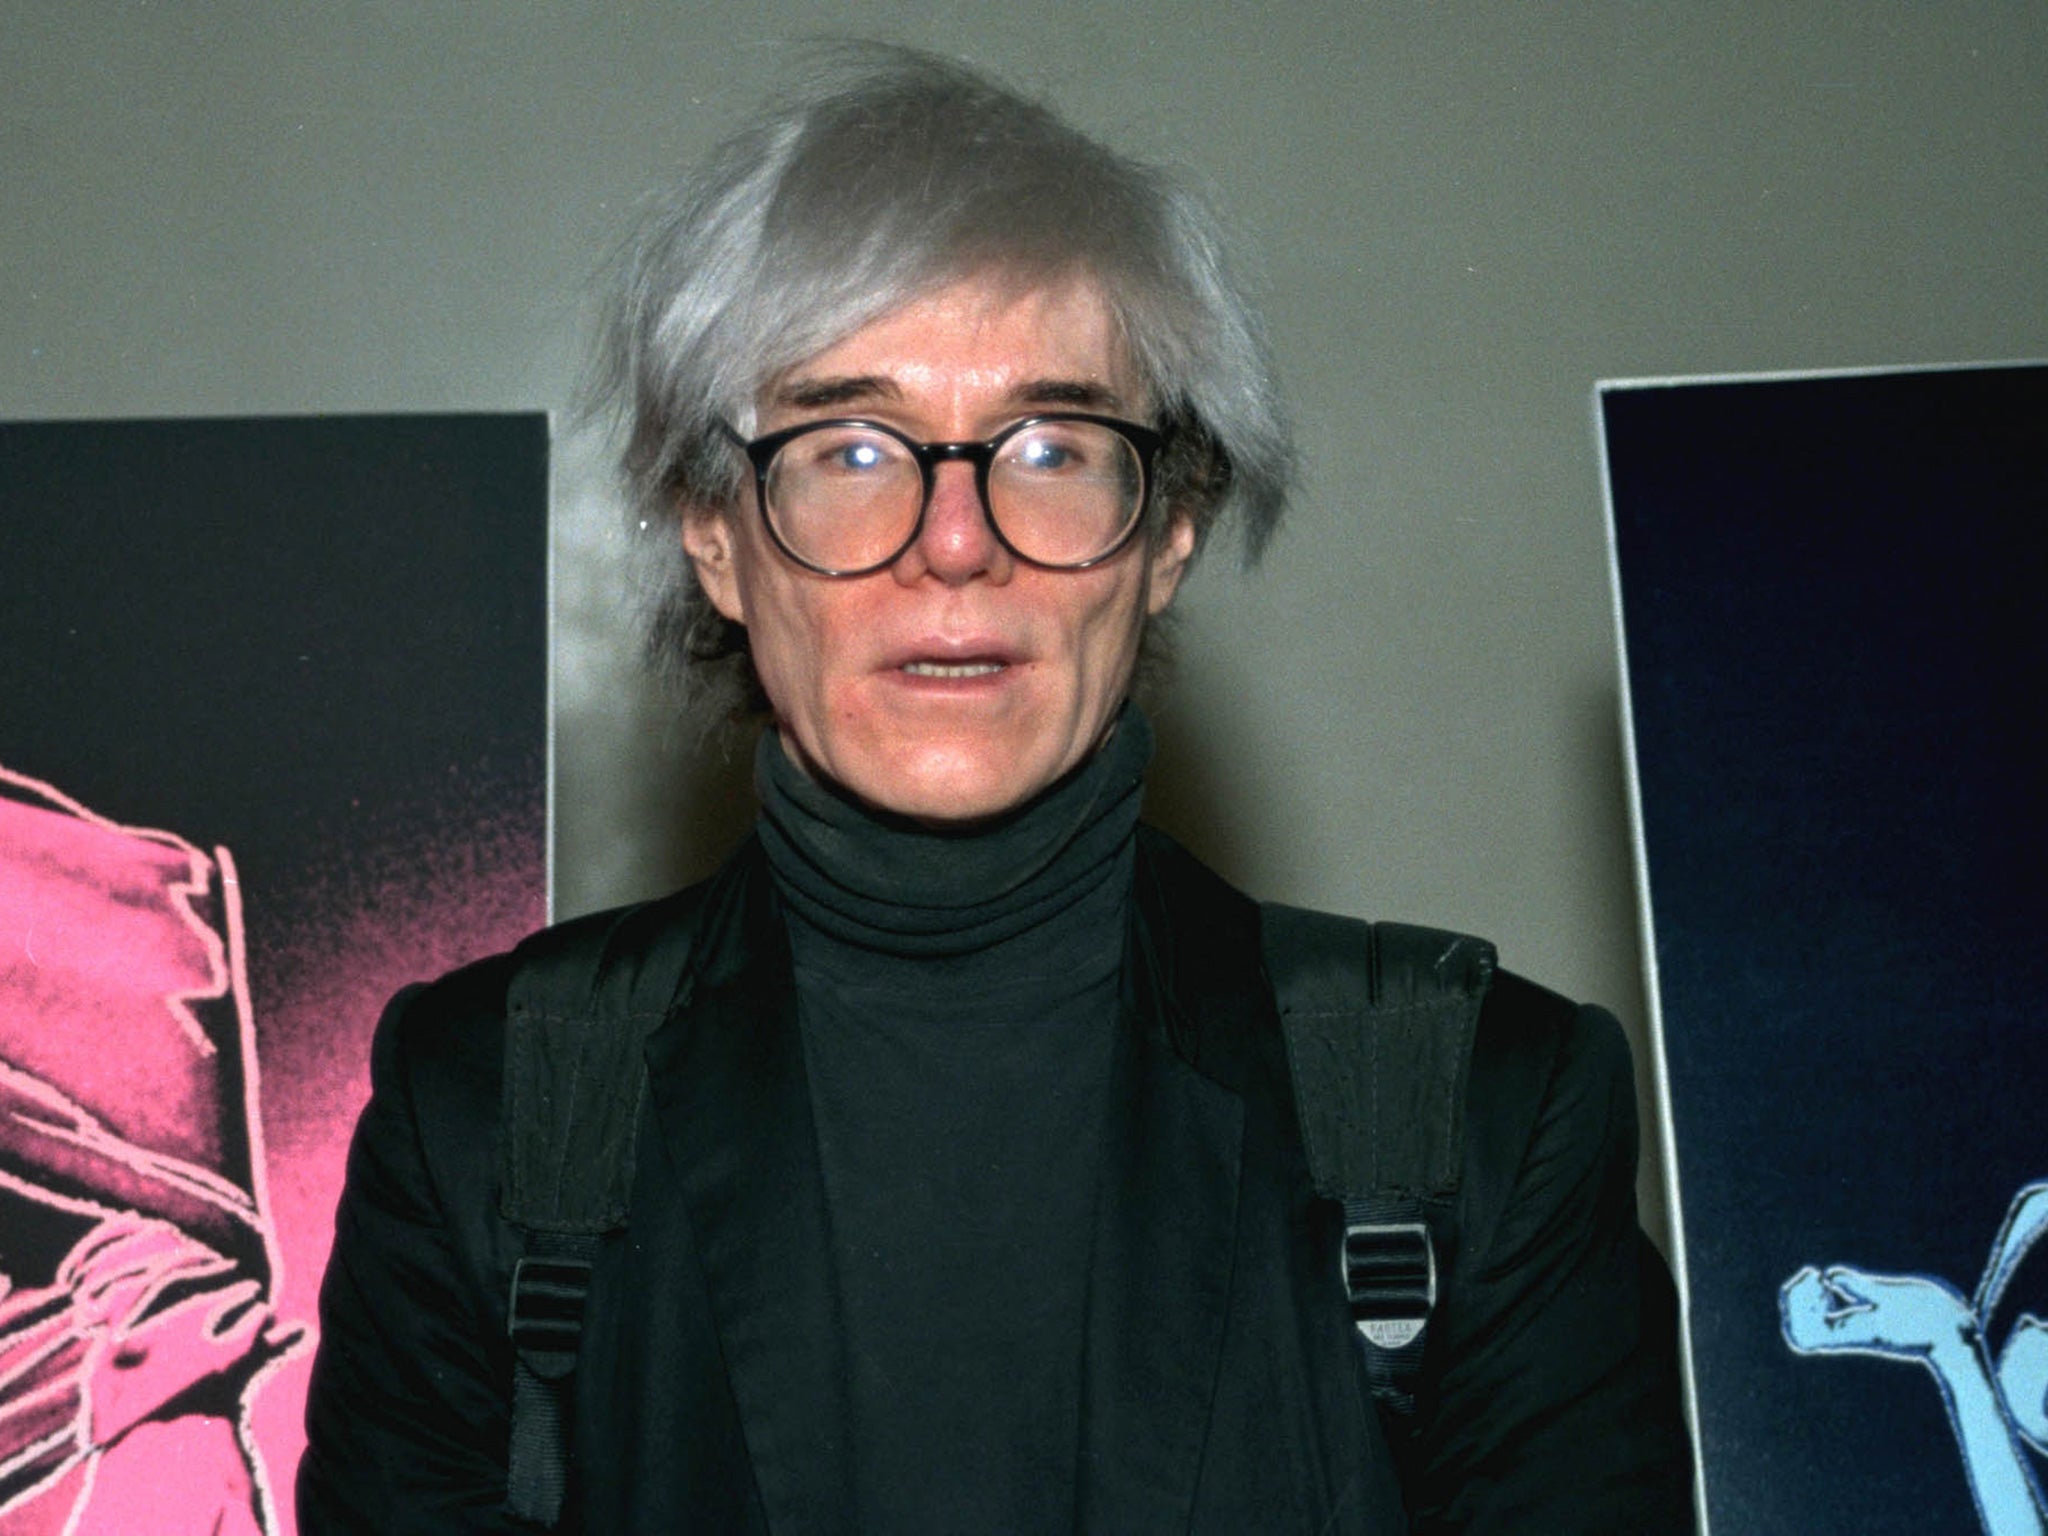 Andy Warhol was raised in Pittsburgh, Pennsylvania, before moving to New York to pursue his artistic career